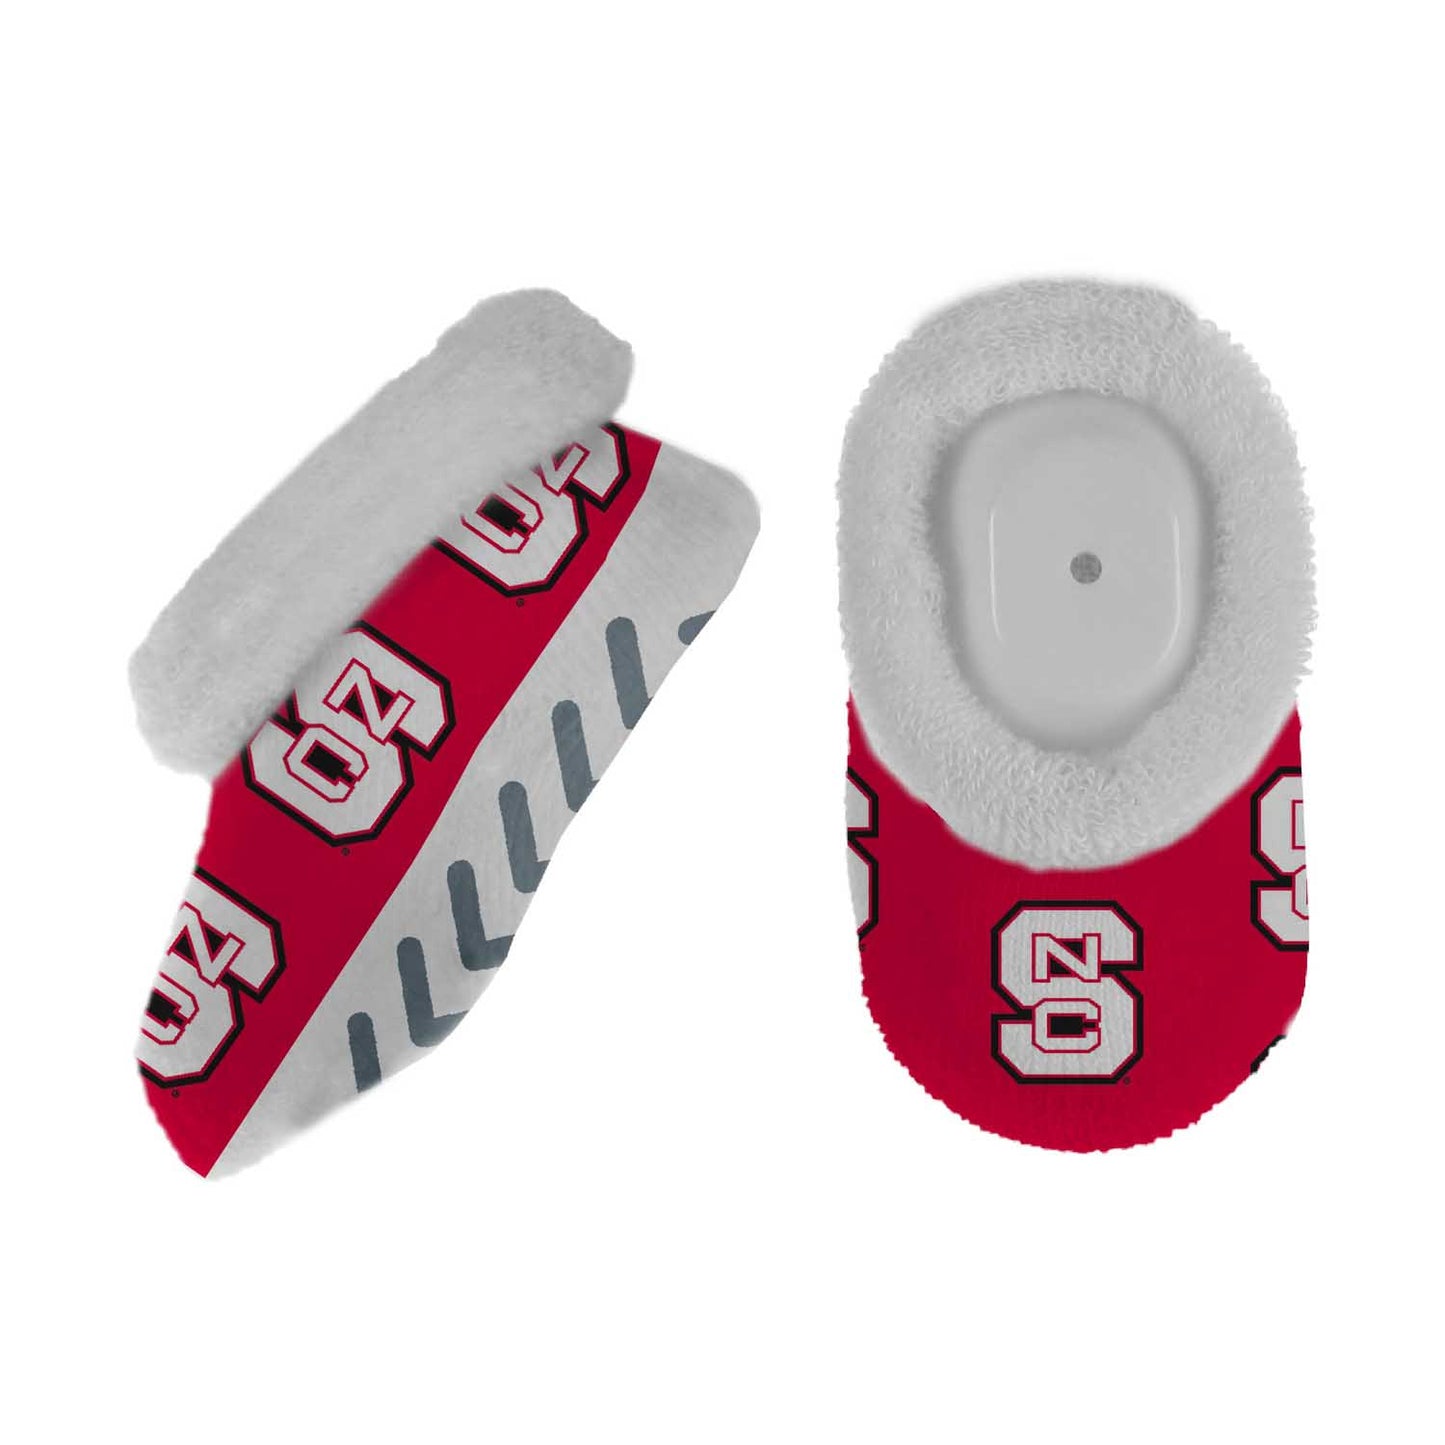 NC State Wolfpack College Baby Booties Infant Boys Girls Cozy Slipper Socks - Red